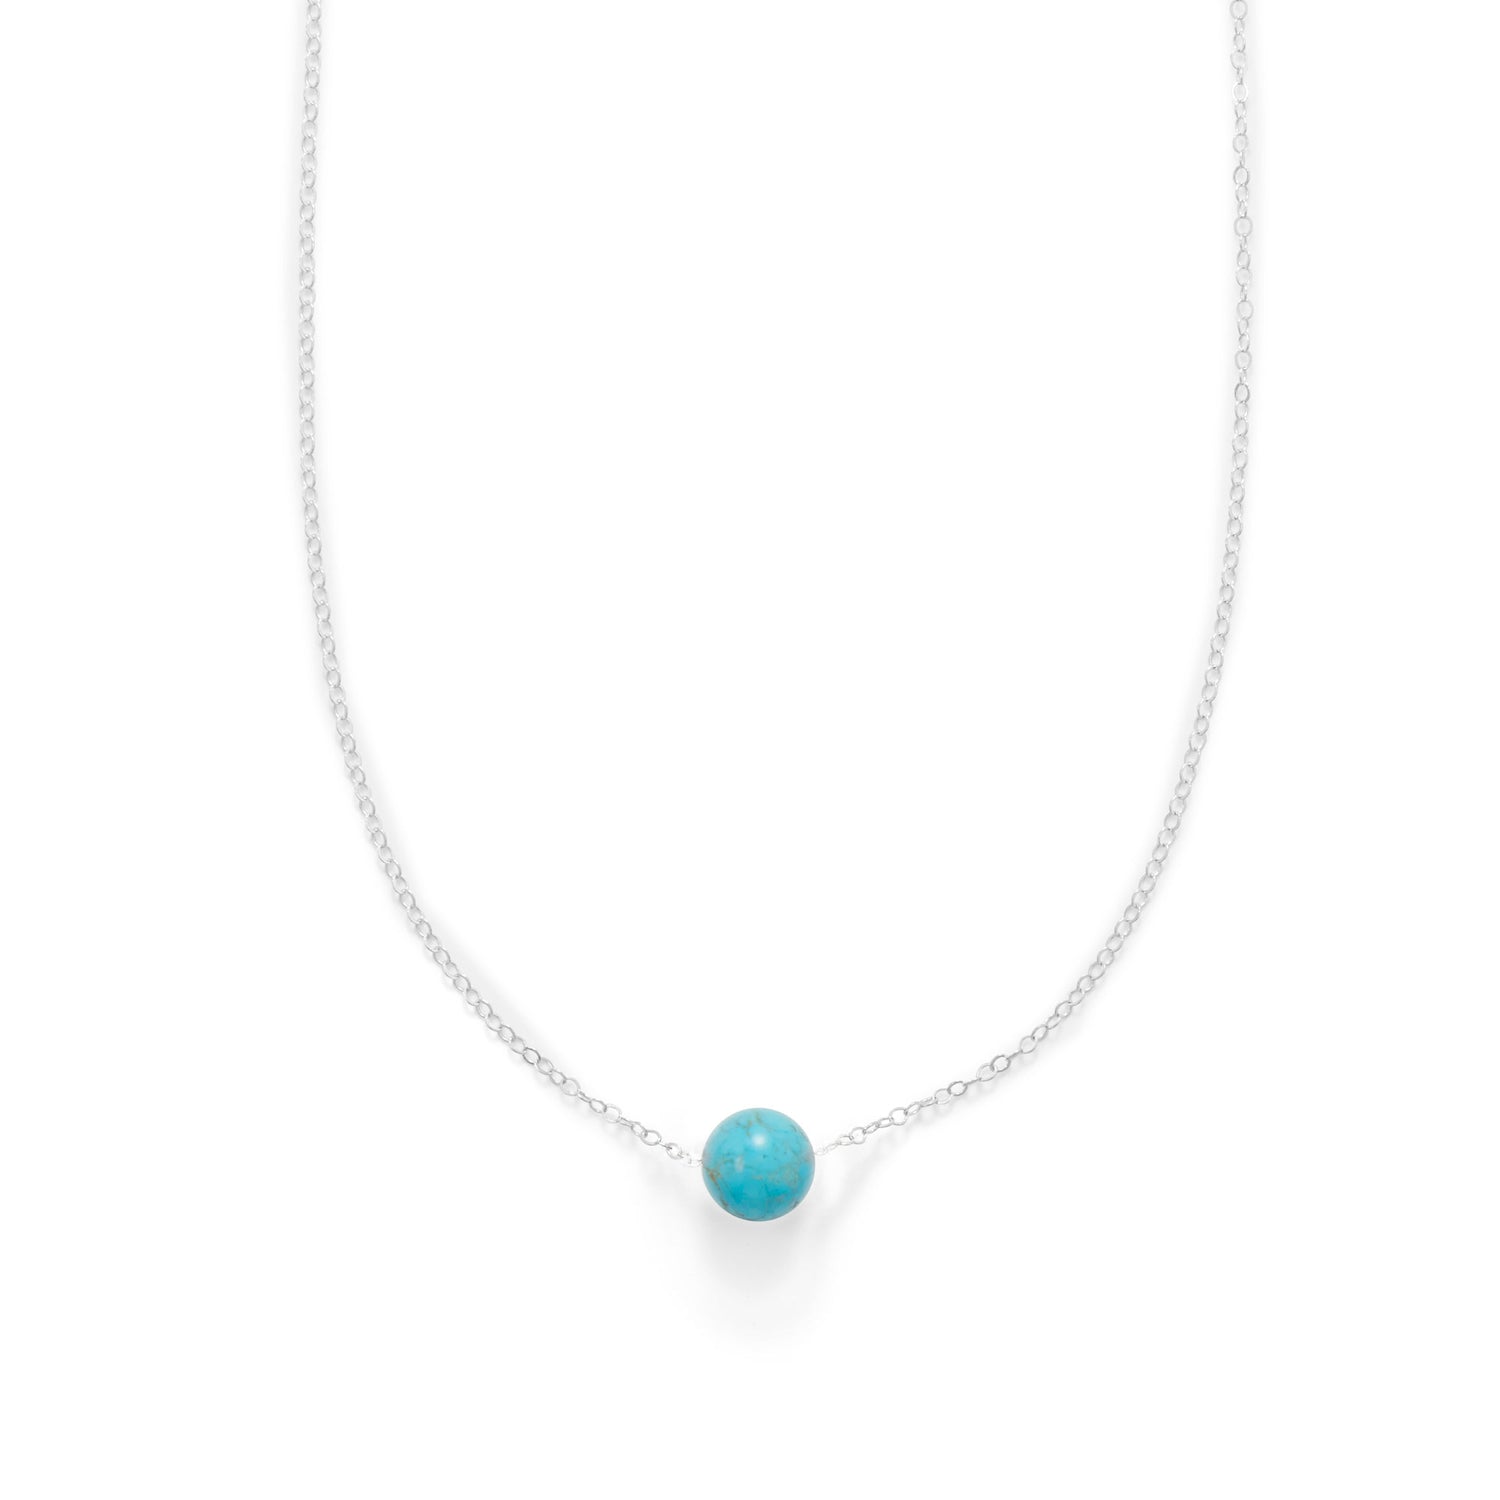 16" + 2" Floating Blue Magnesite Bead Necklace